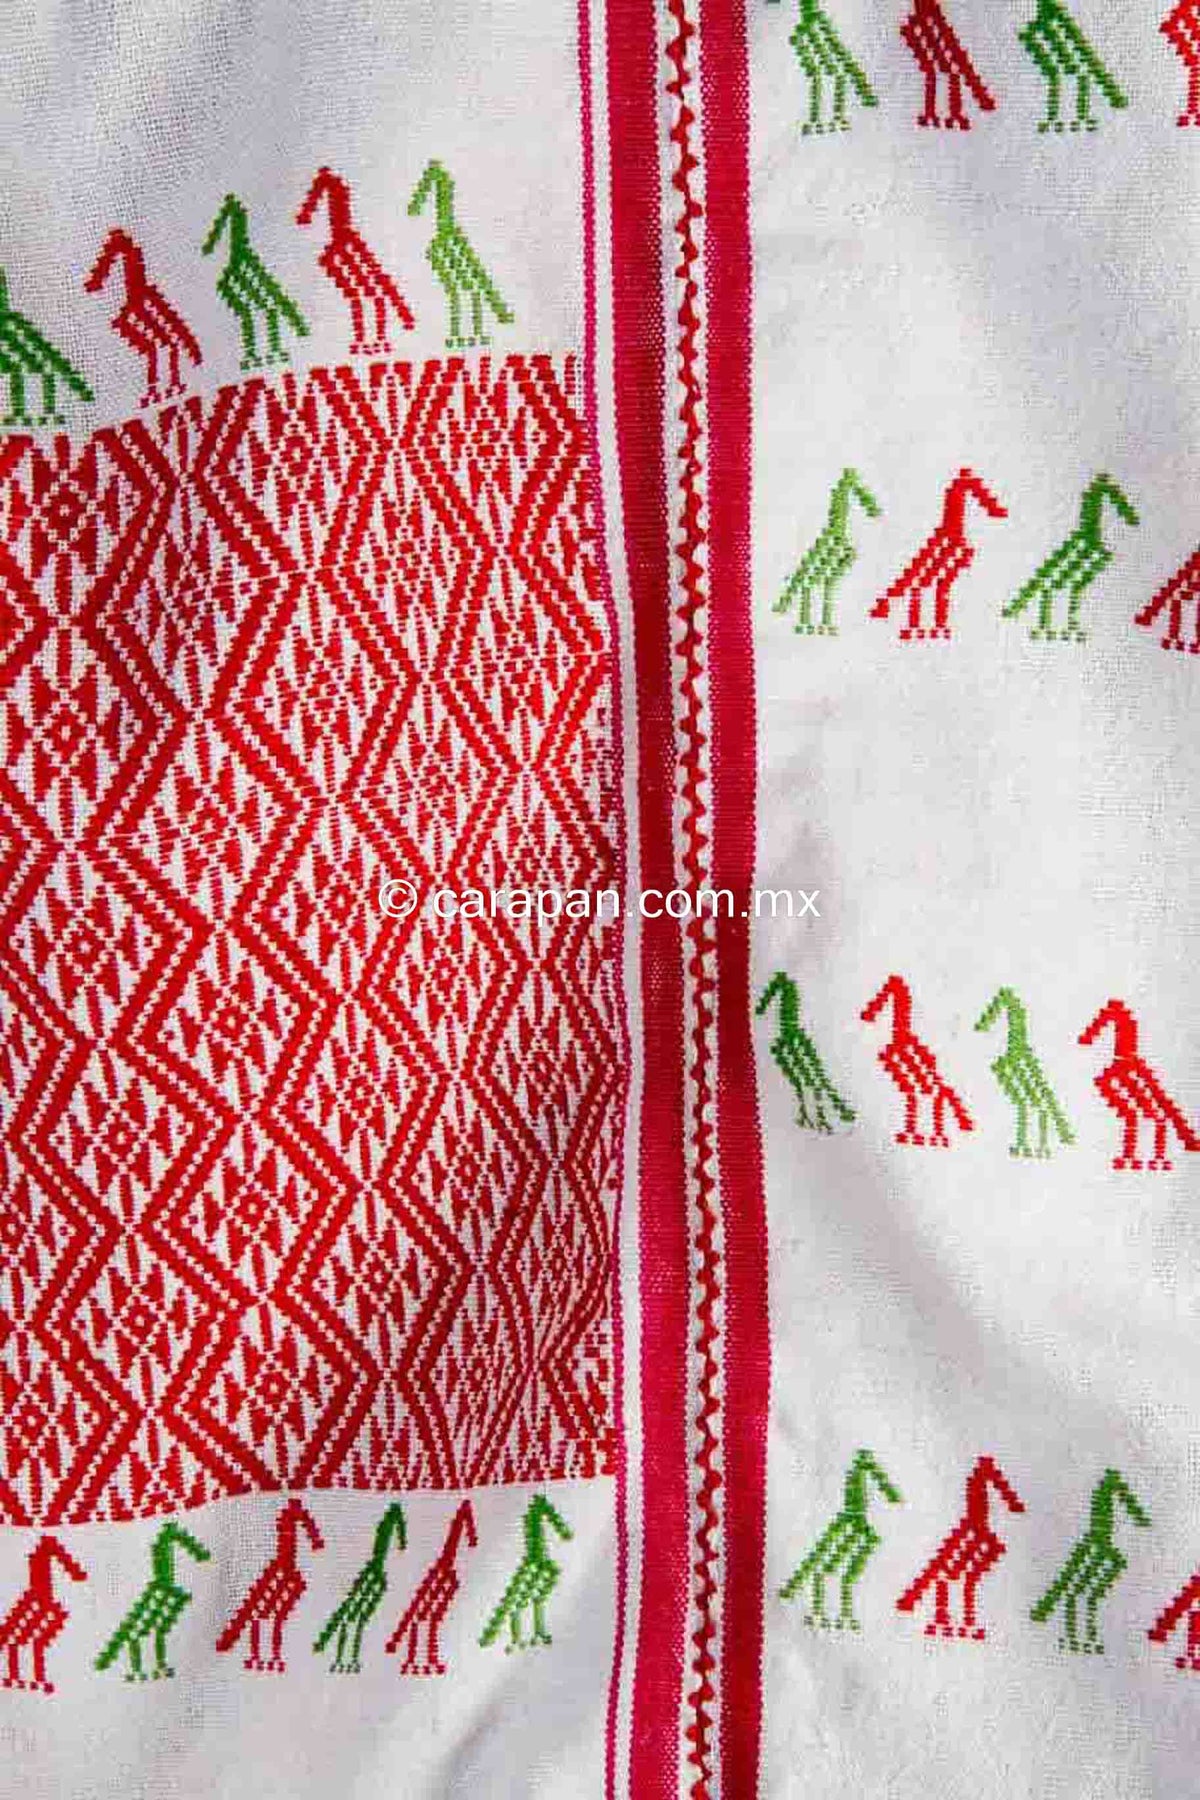 Mexican Indigenous Textile Huipil with Mexicos Flag Colors Green, Red and White